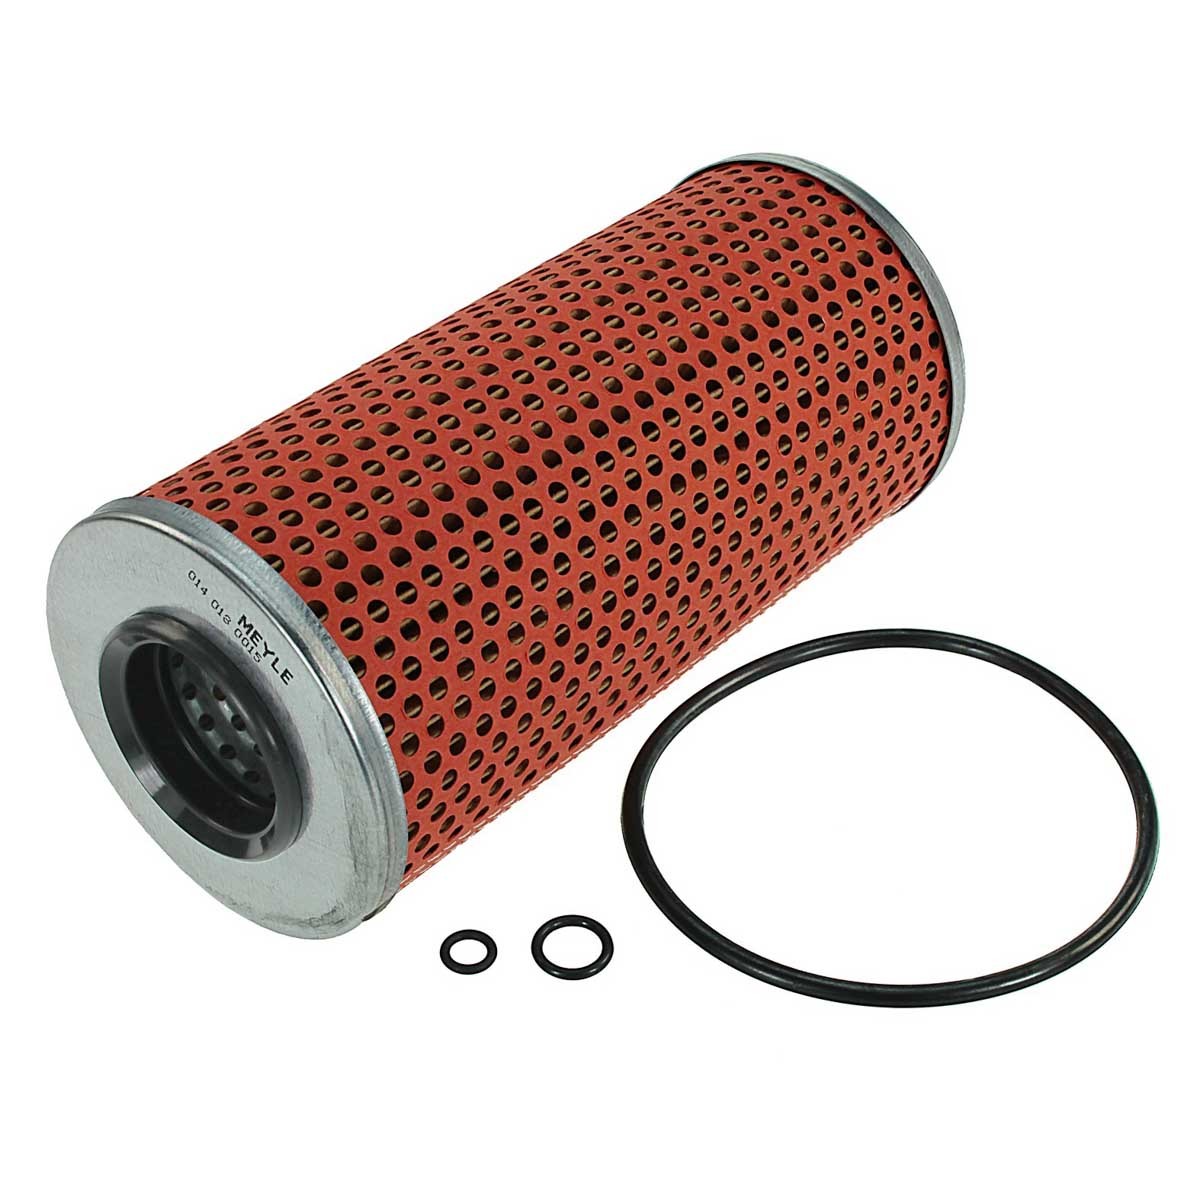 MEYLE 014 018 0015 Oil filter ORIGINAL Quality, with gaskets/seals, Filter Insert